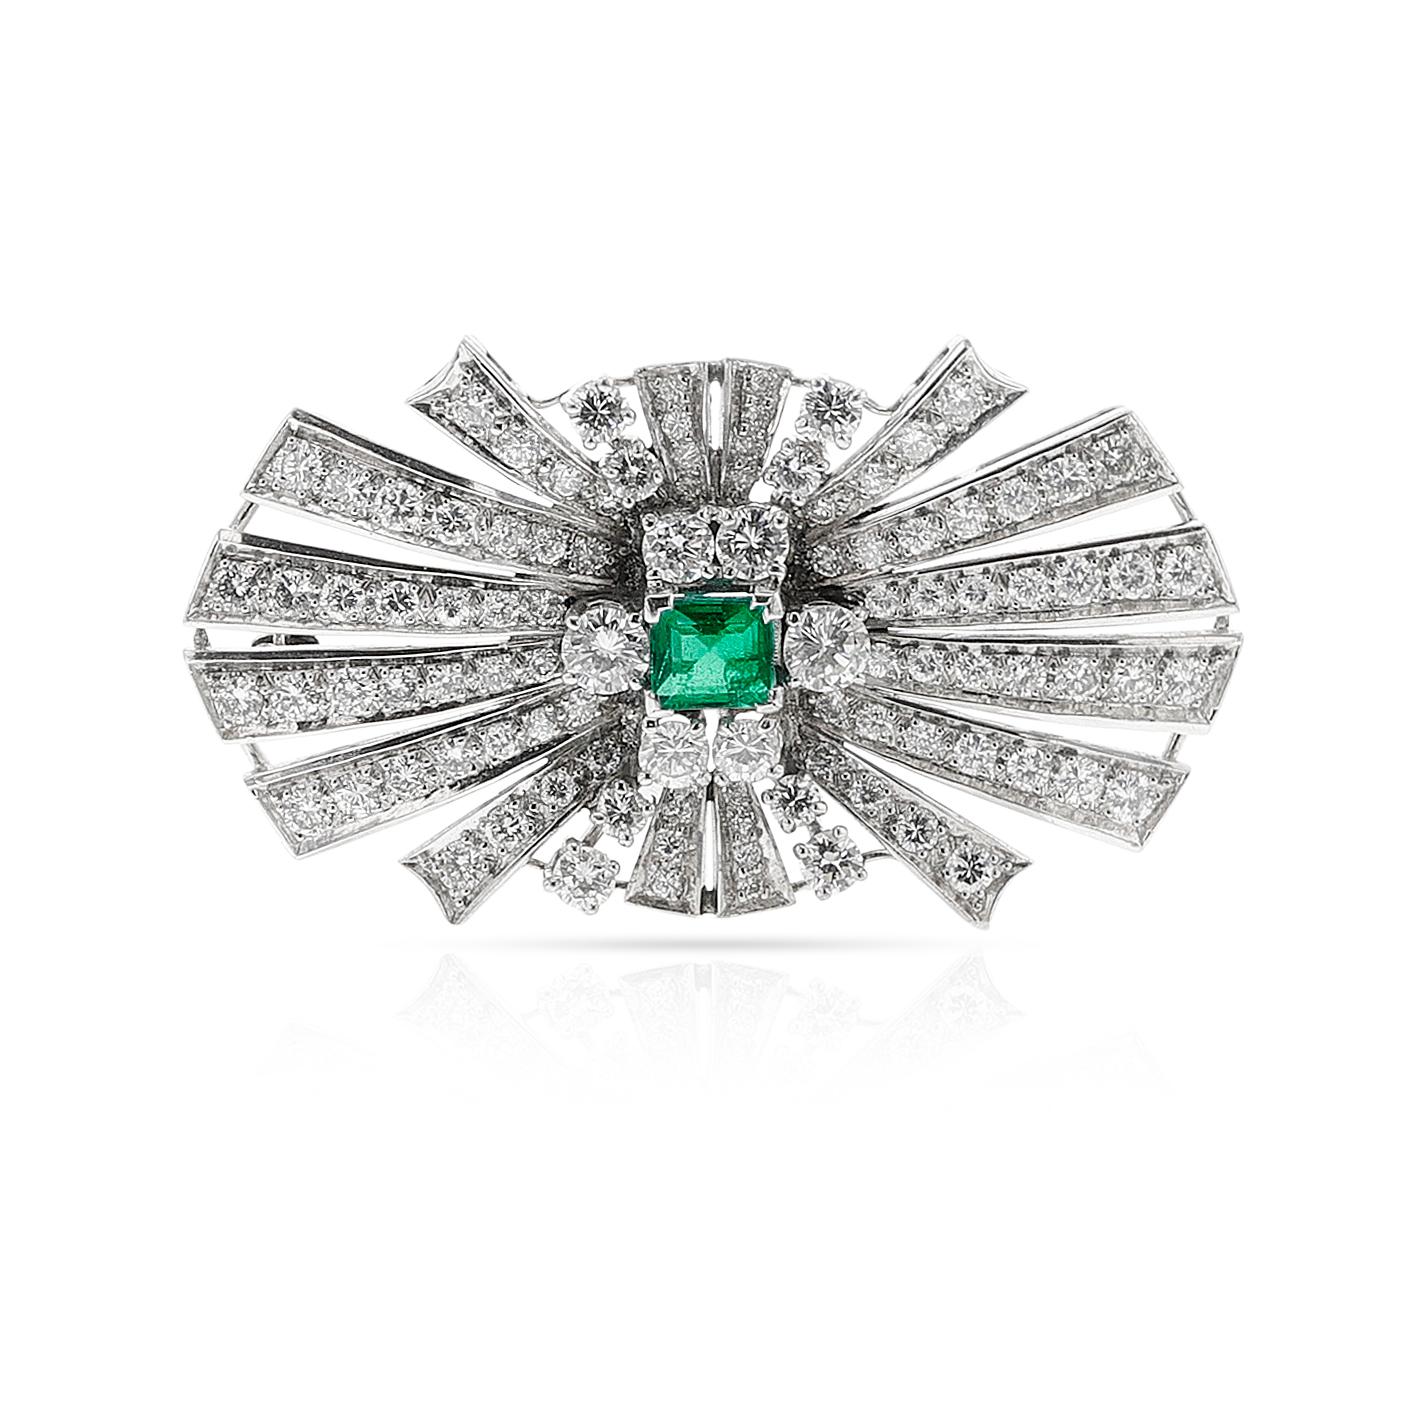 An Emerald and Diamond Bow Brooch made in Platinum. Set with a square emerald, weighing appx. 0.60 carats and round diamonds appx. 4 carats. The length is 1 3/4 inches. The brooch is made in platinum. The diamonds are estimated H-I color, VS